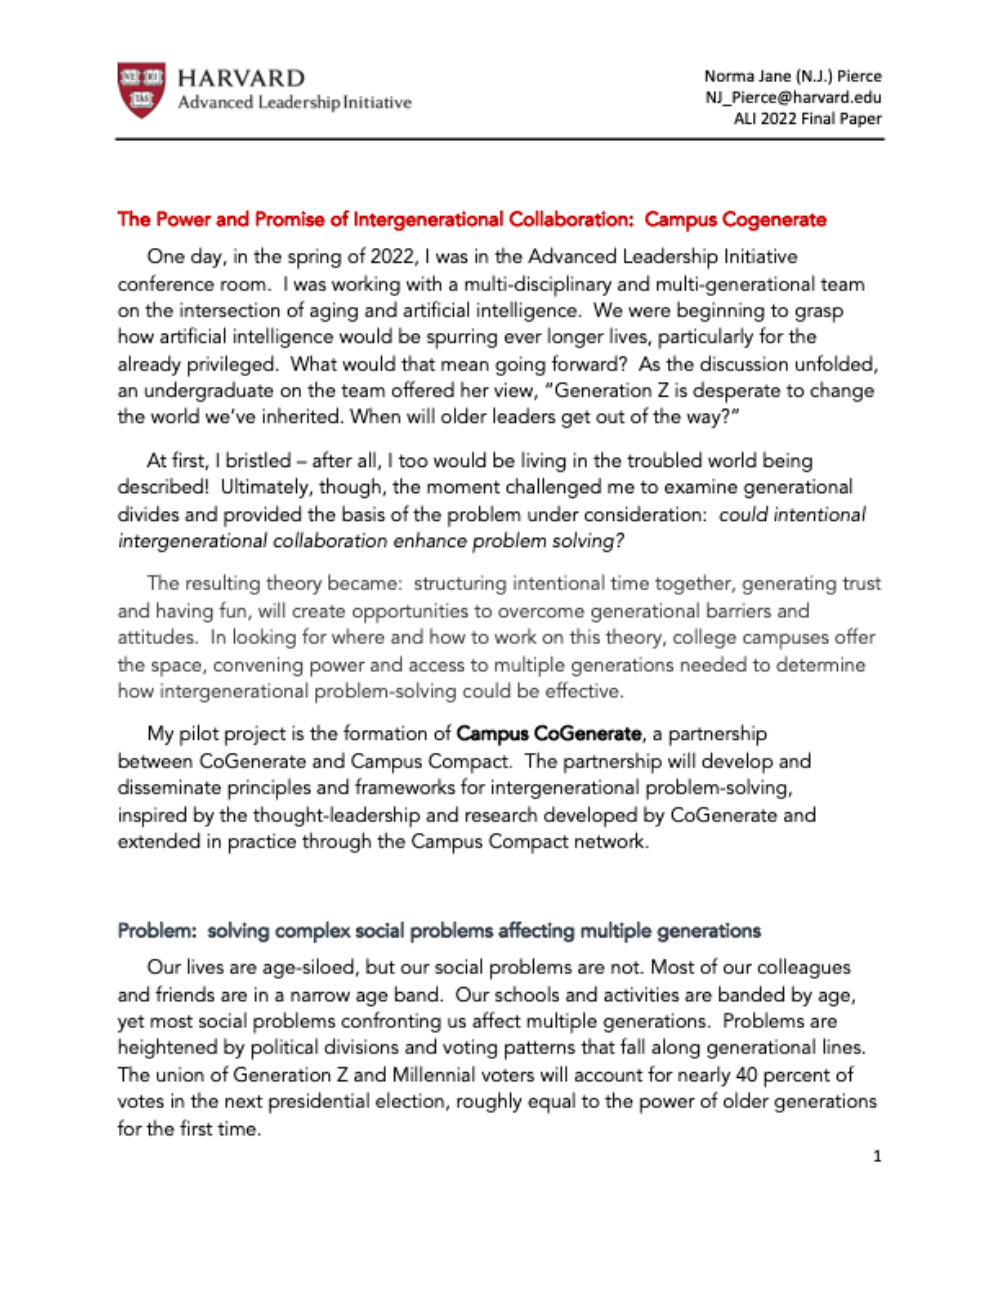 The Power and Promise of Intergenerational Collaboration report cover